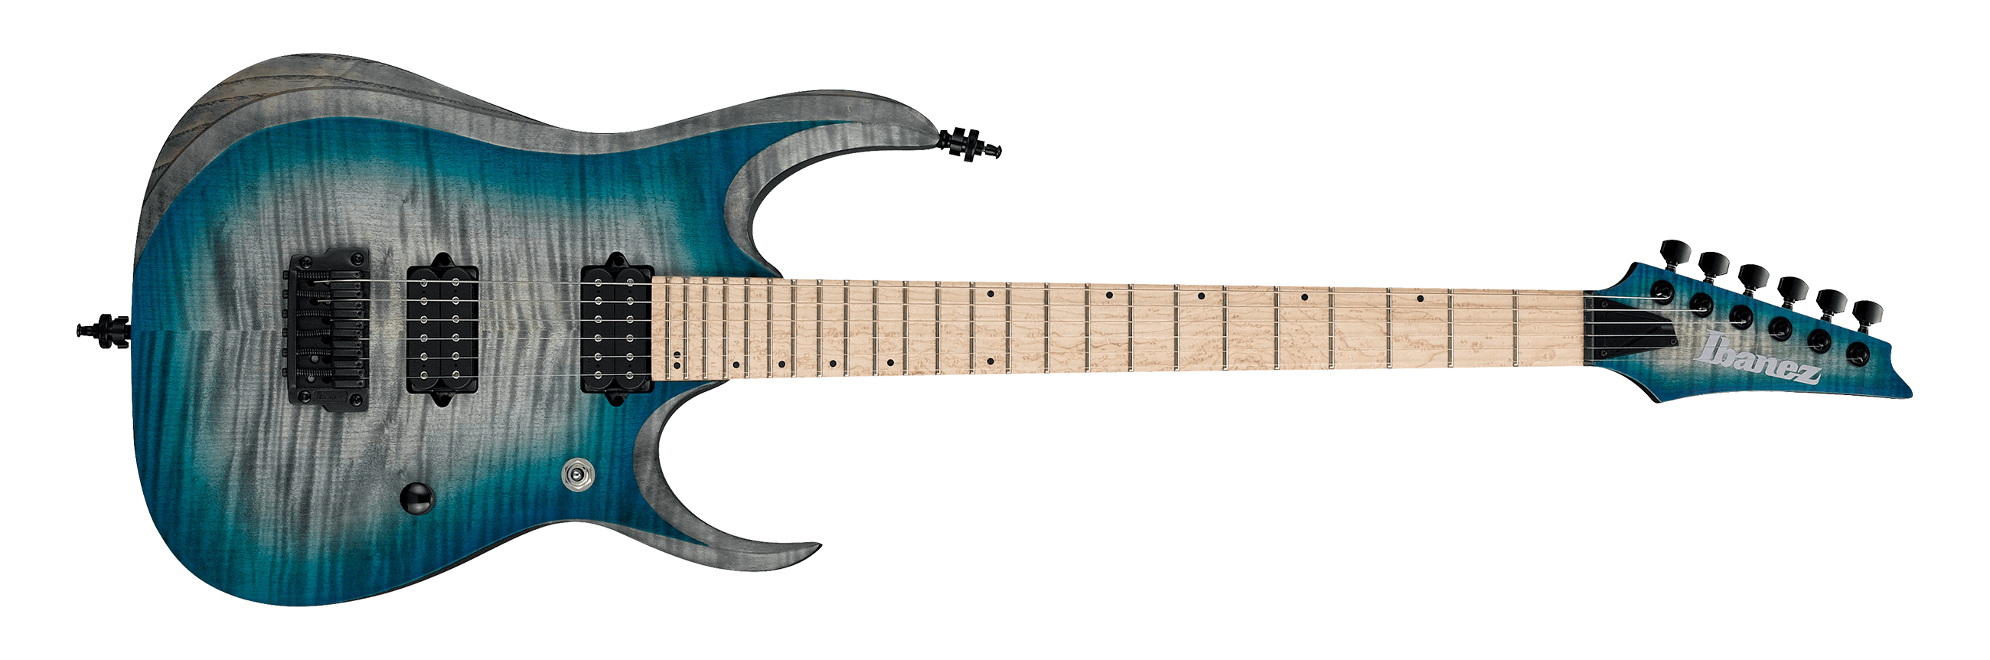 Ibanez RGD61AL RGD Axion 6 String Electric Guitar with Ash Body, Flamed Maple Top and Birdseye Maple Fingerboard - SSB Stained Sapphire Blue Burst for sale